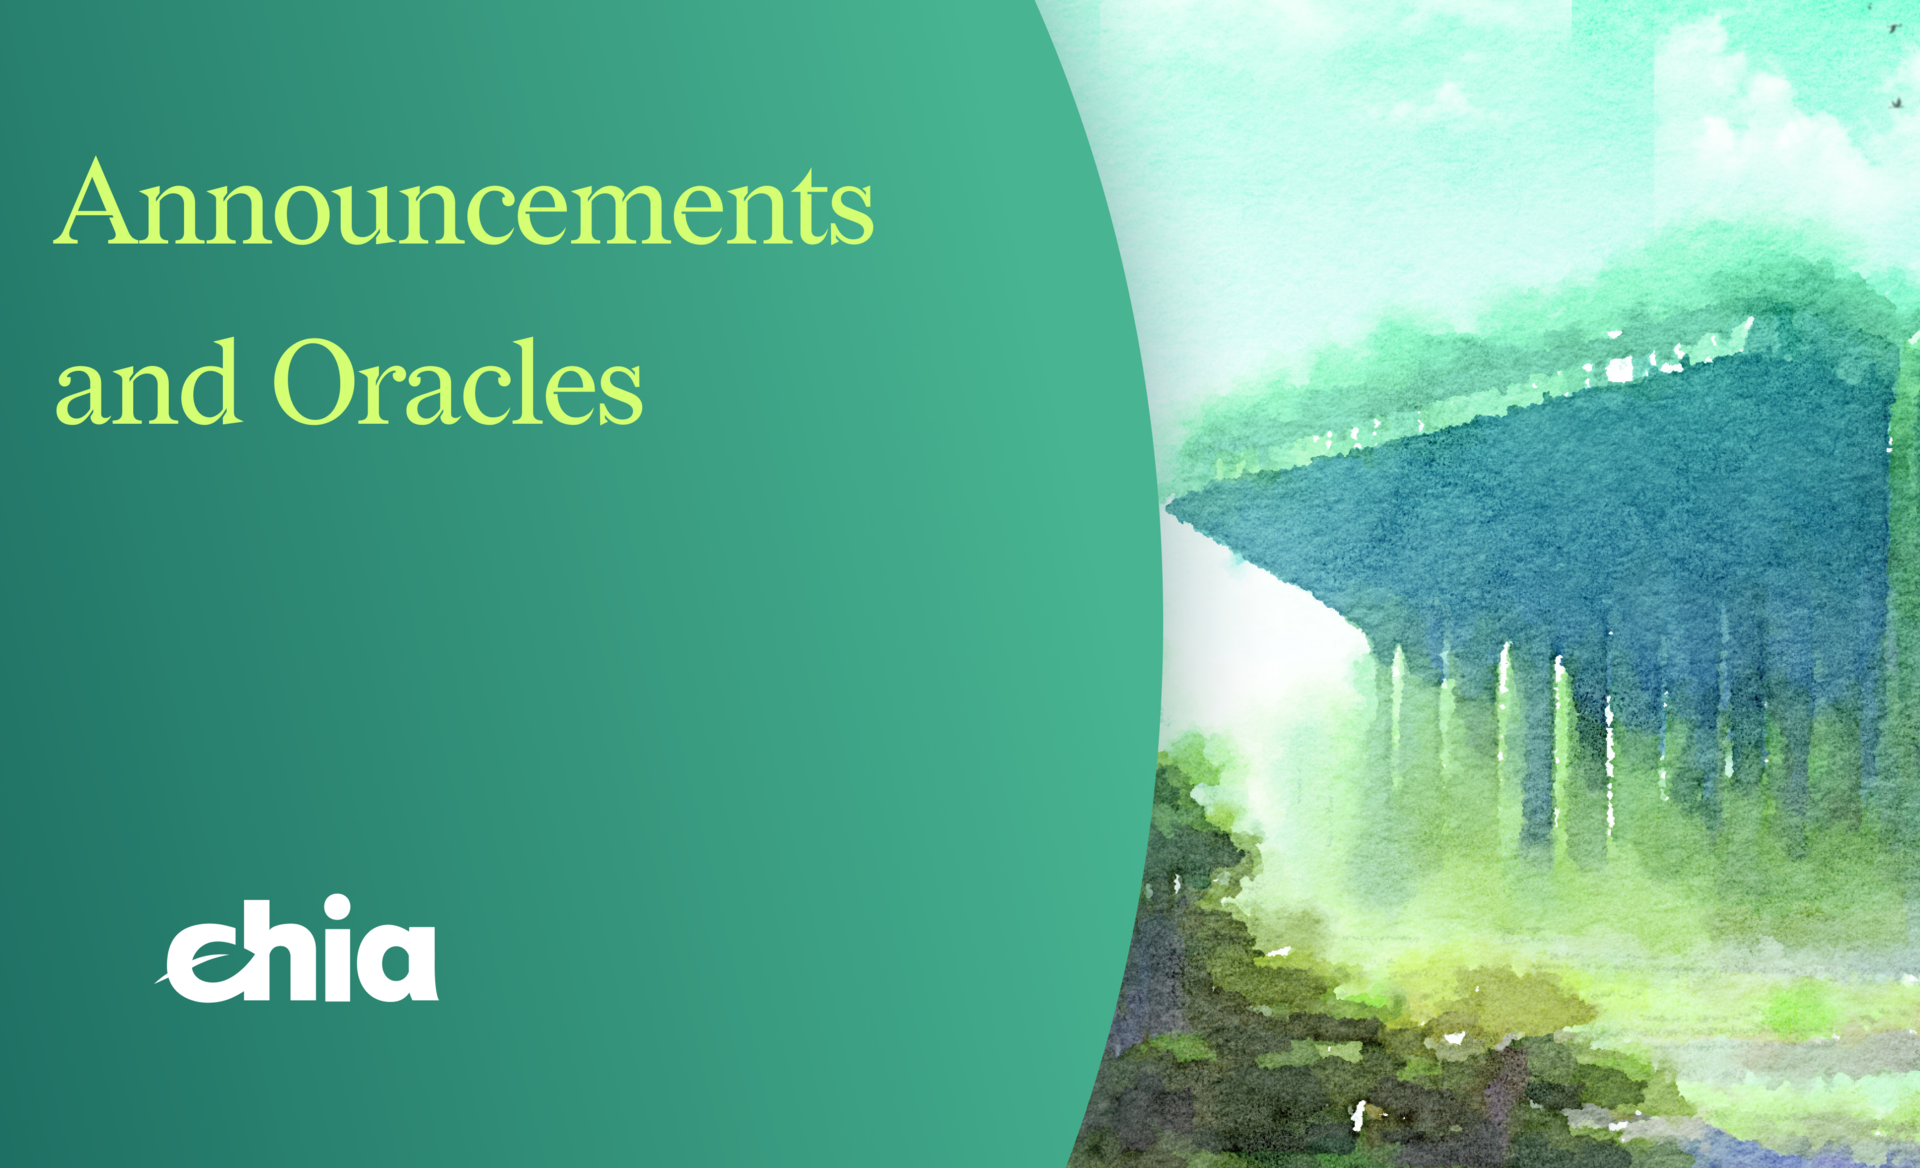 Announcements and Oracles